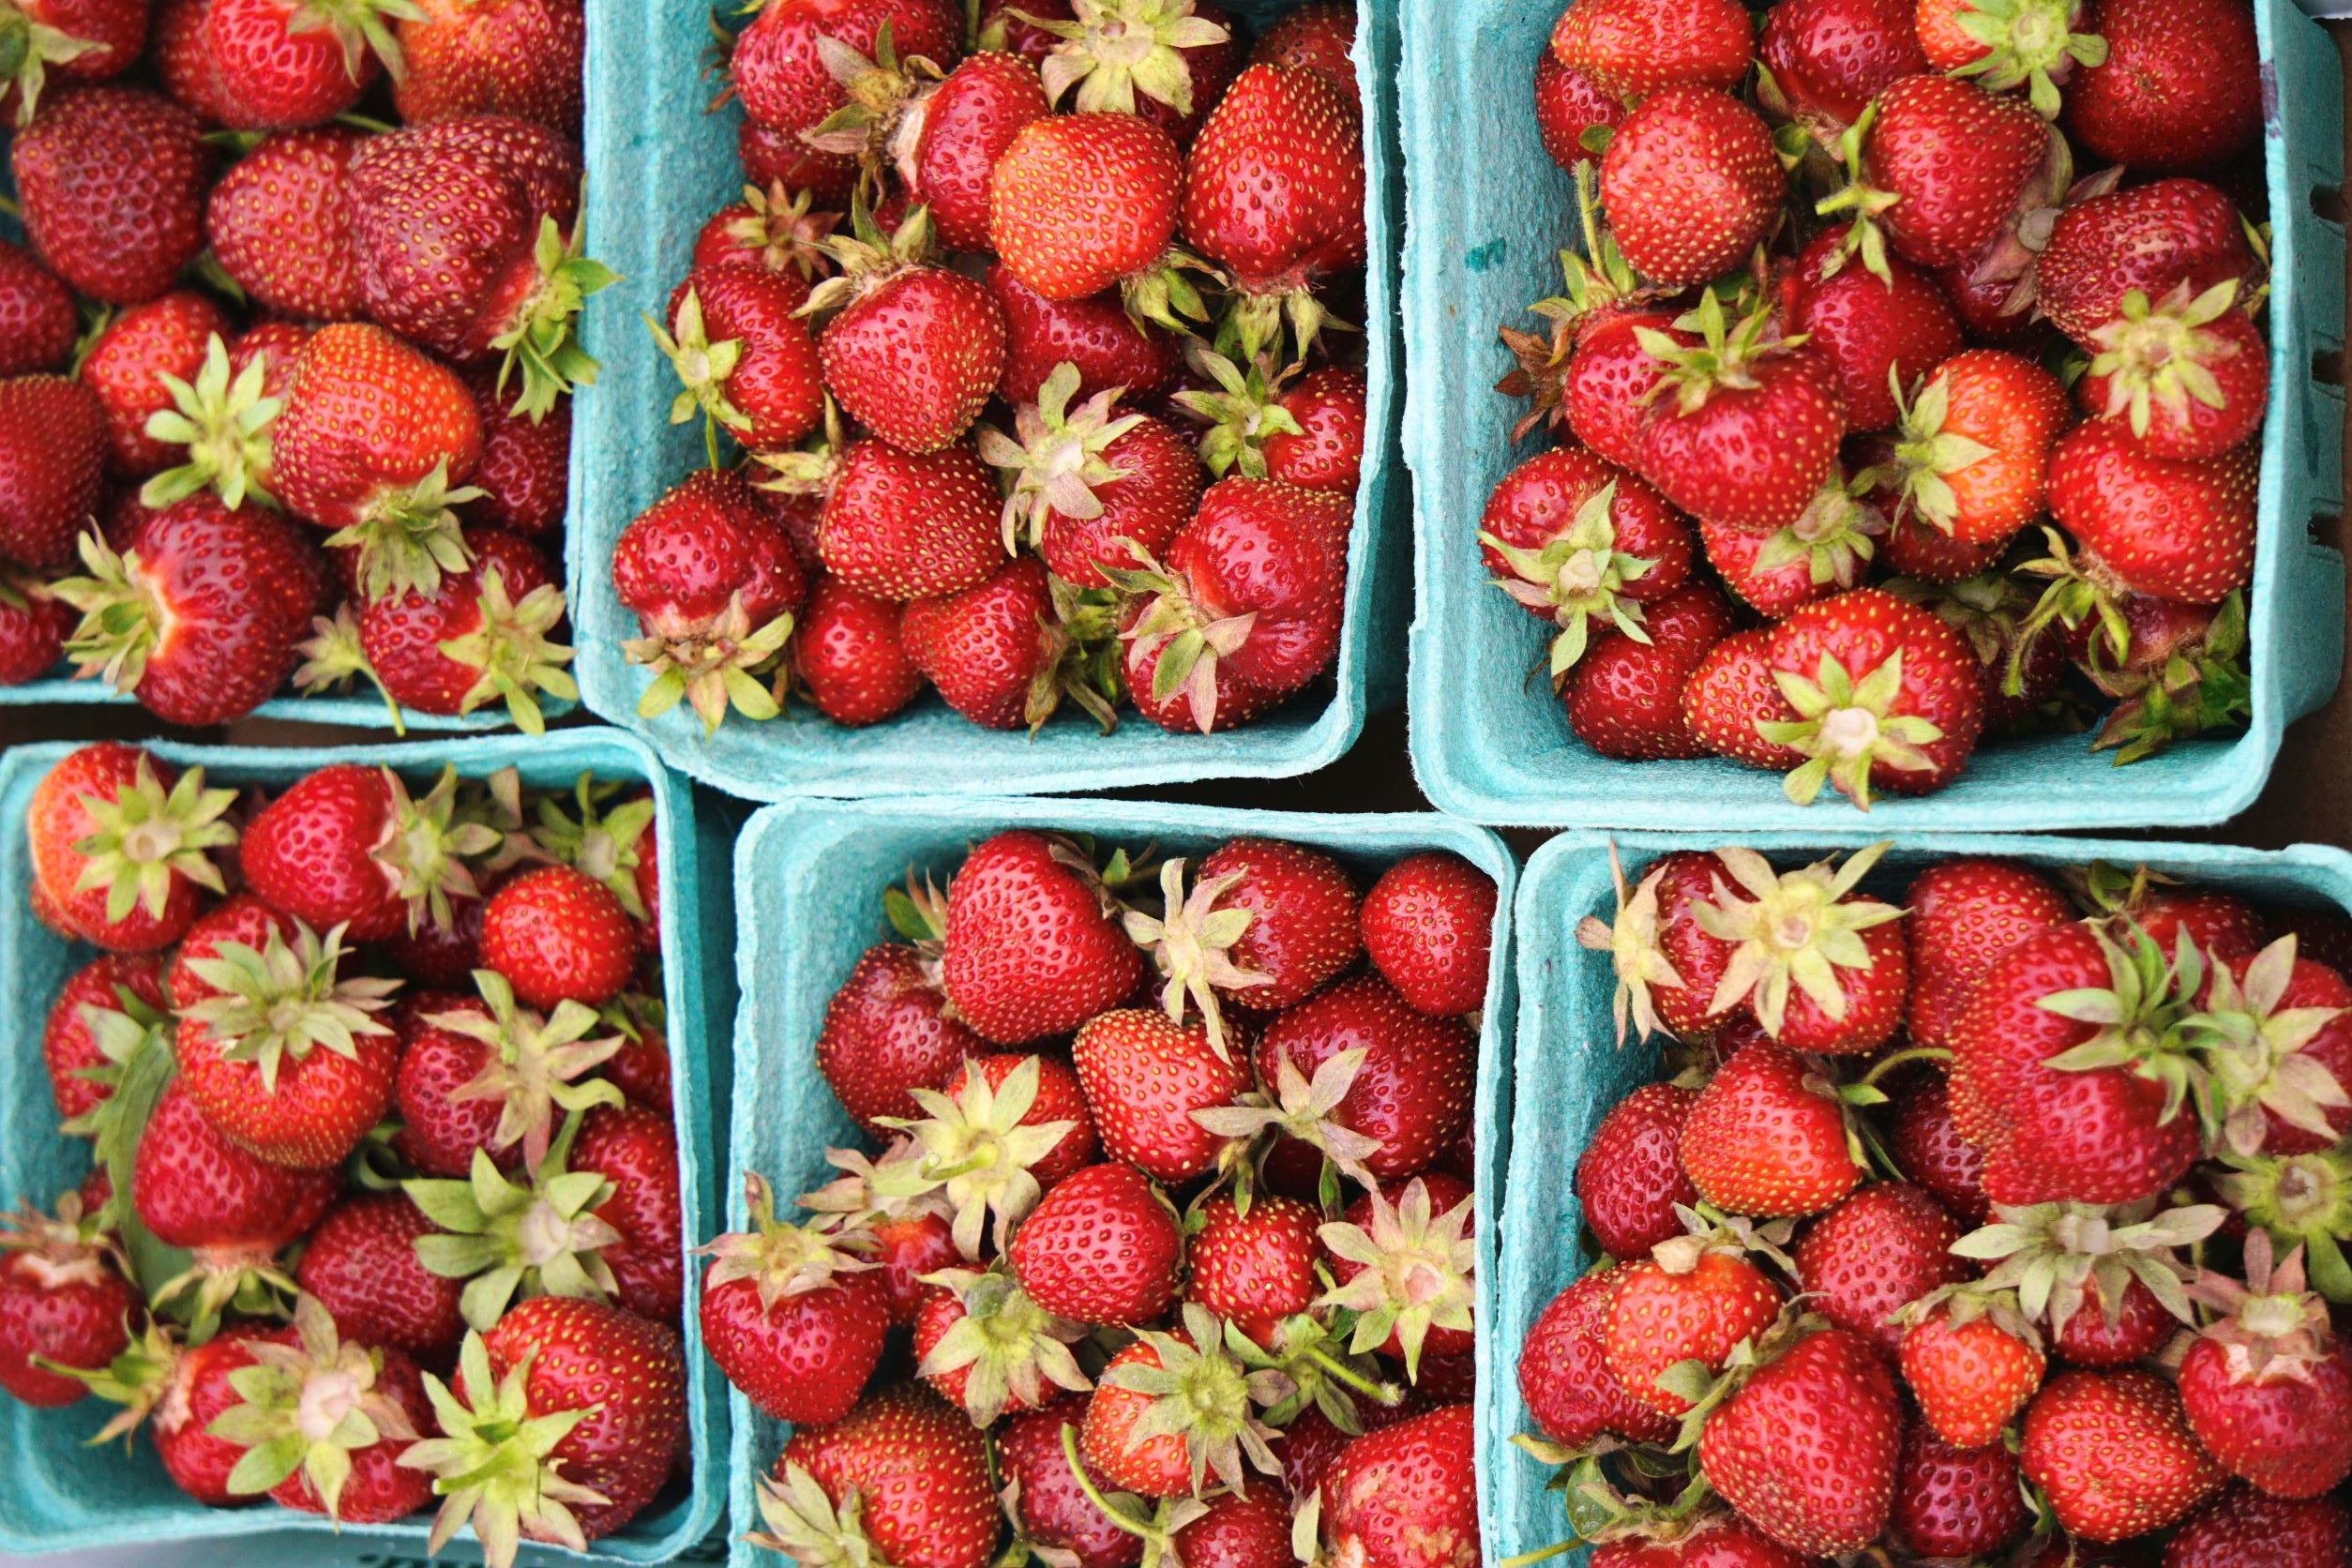 pick your own strawberries at pineland farms